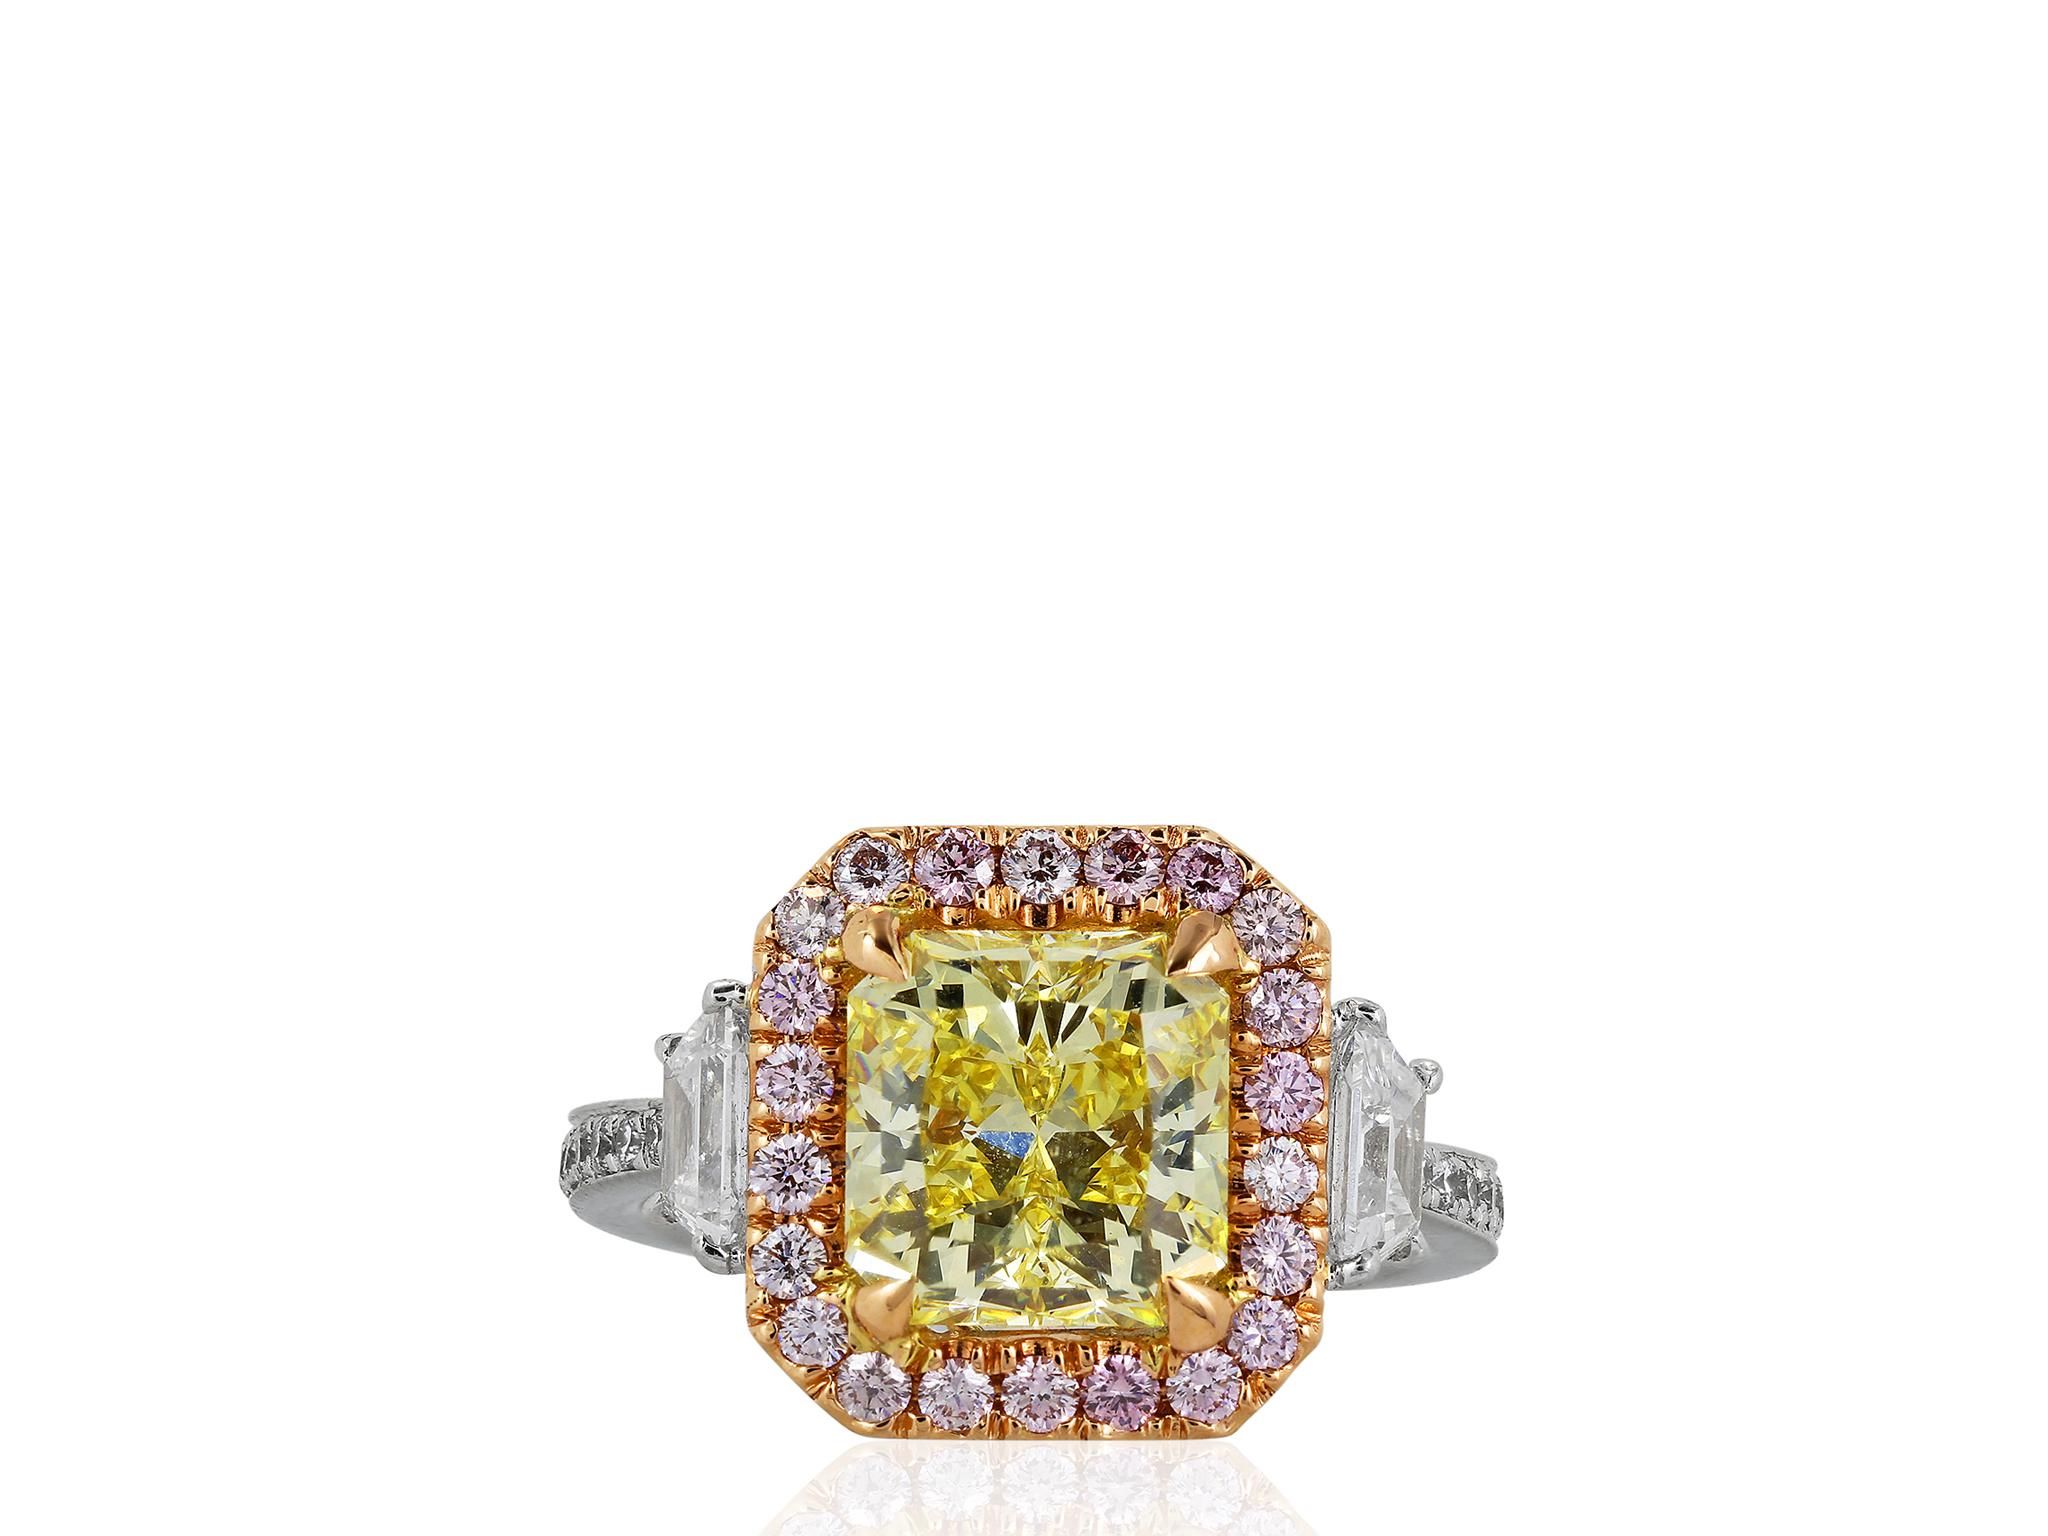 Contemporary 3.02 Carat GIA Certified Fancy Intense Yellow and Pink Diamond Engagement Ring For Sale